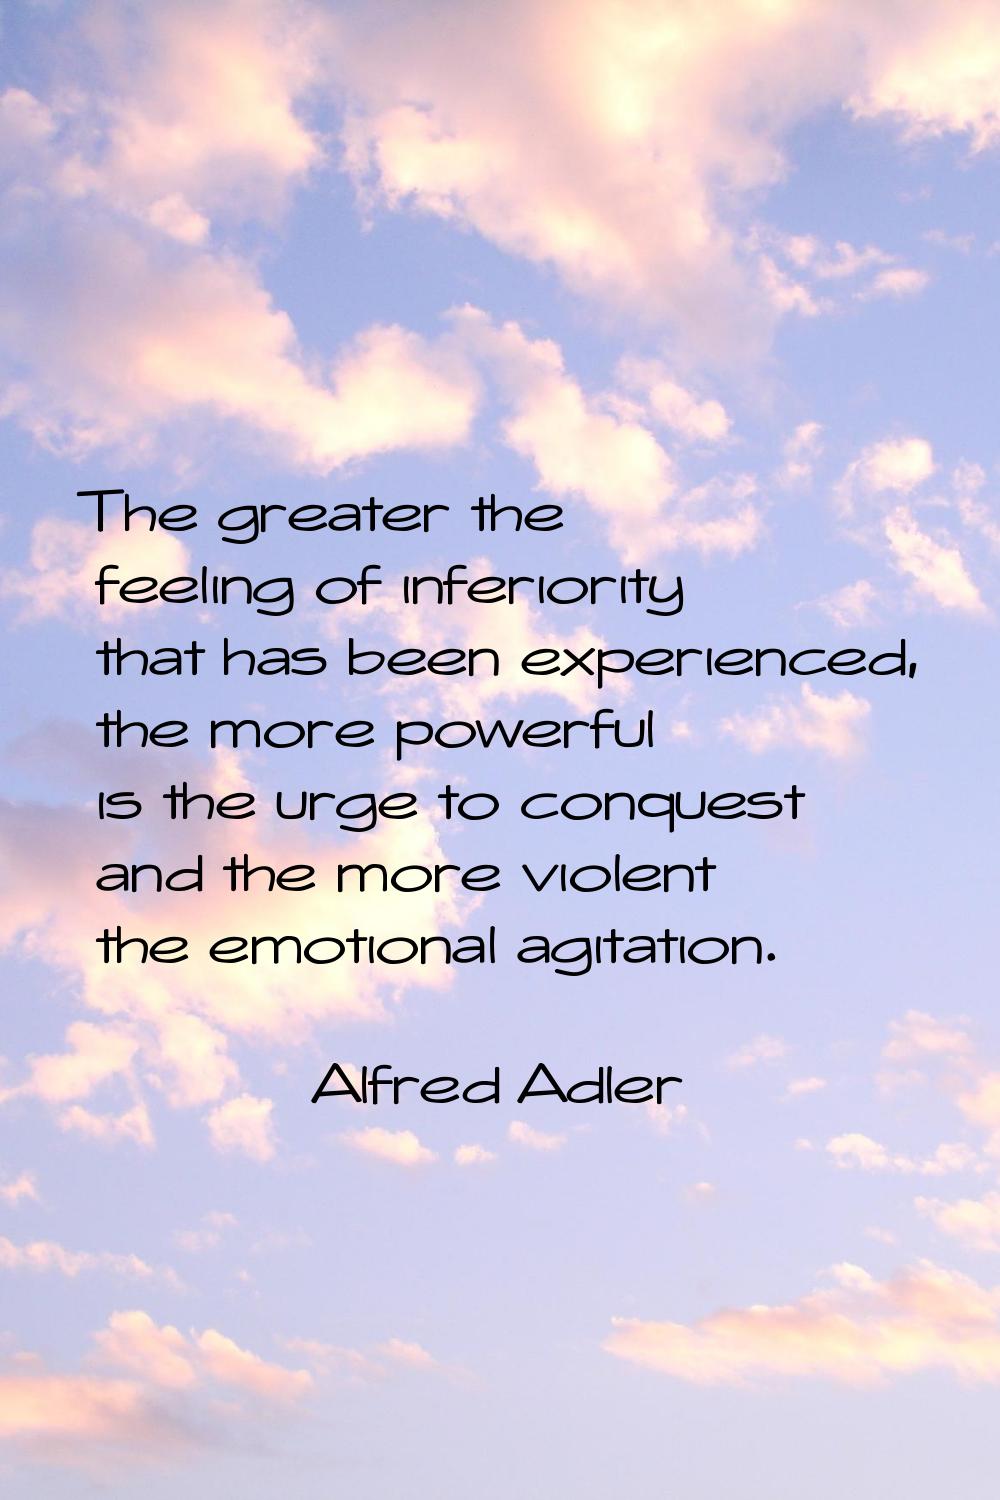 The greater the feeling of inferiority that has been experienced, the more powerful is the urge to 